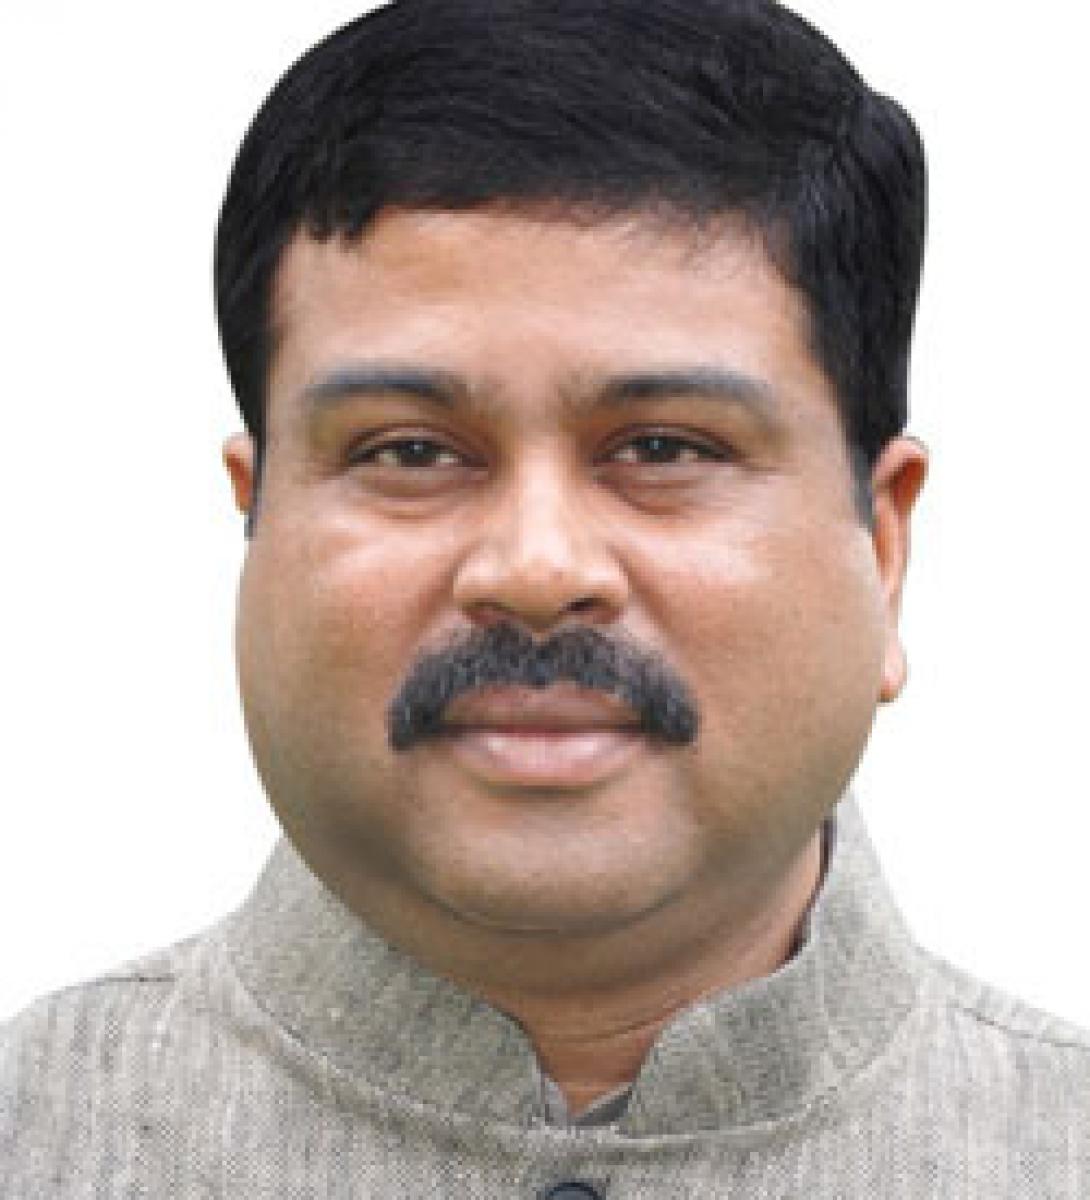 Petro products will be under GST: Pradhan